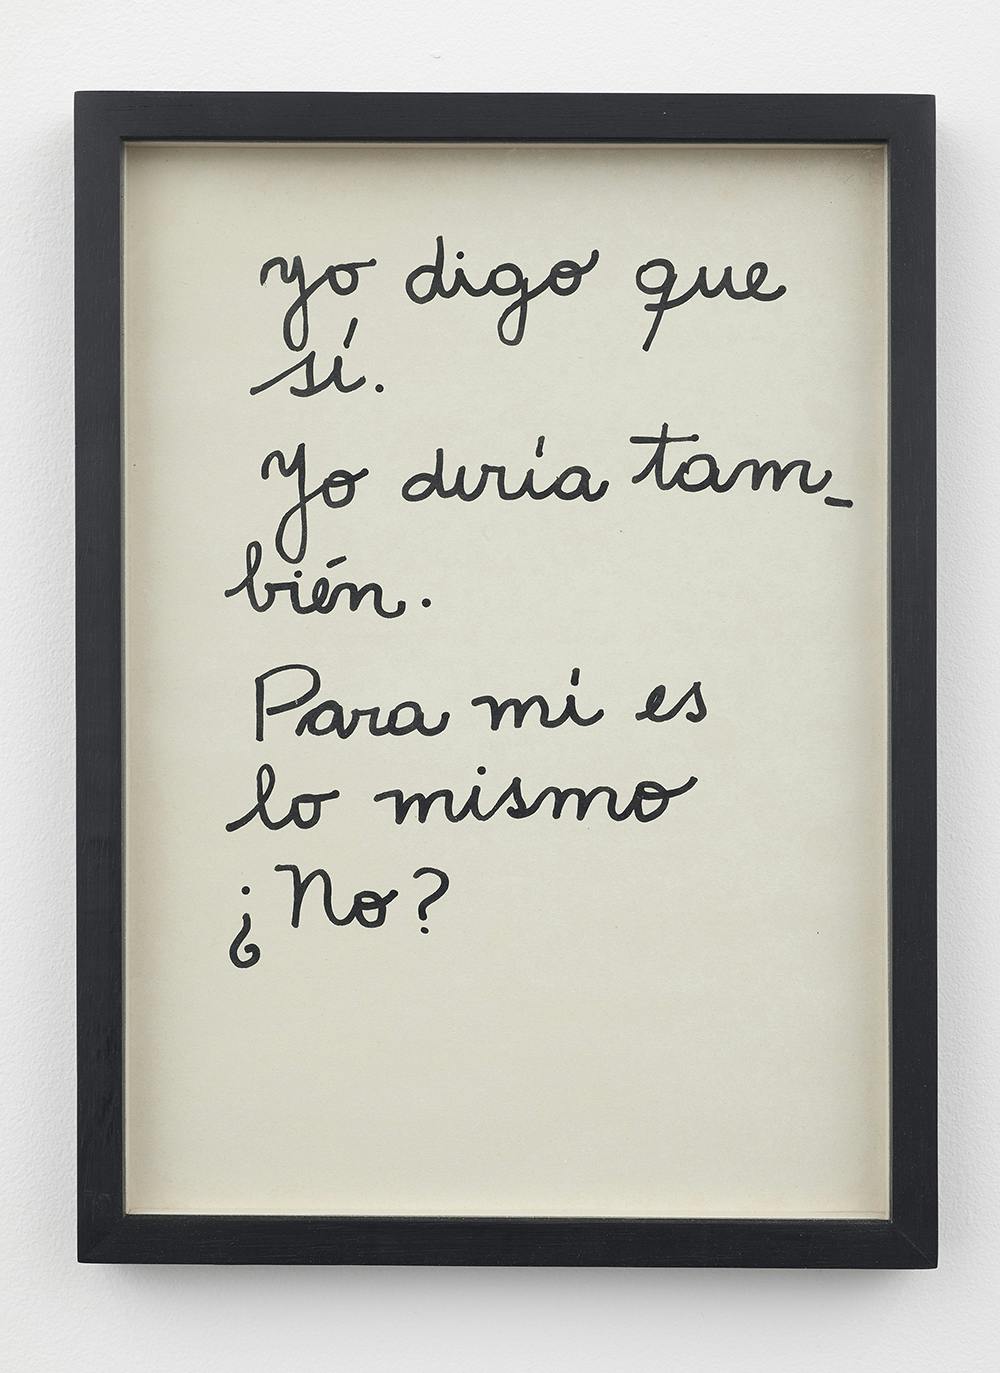 A white page with black cursive text is mounted mounted in a black frame and hung on a white wall. The text reads, “Yo digo que / sí. / Yo diría tam_ / bién. / Para mí es / lo mismo / ¿no?” (In English the text translates as, “I say yes. I say also. For me they are the same, are they not?”)